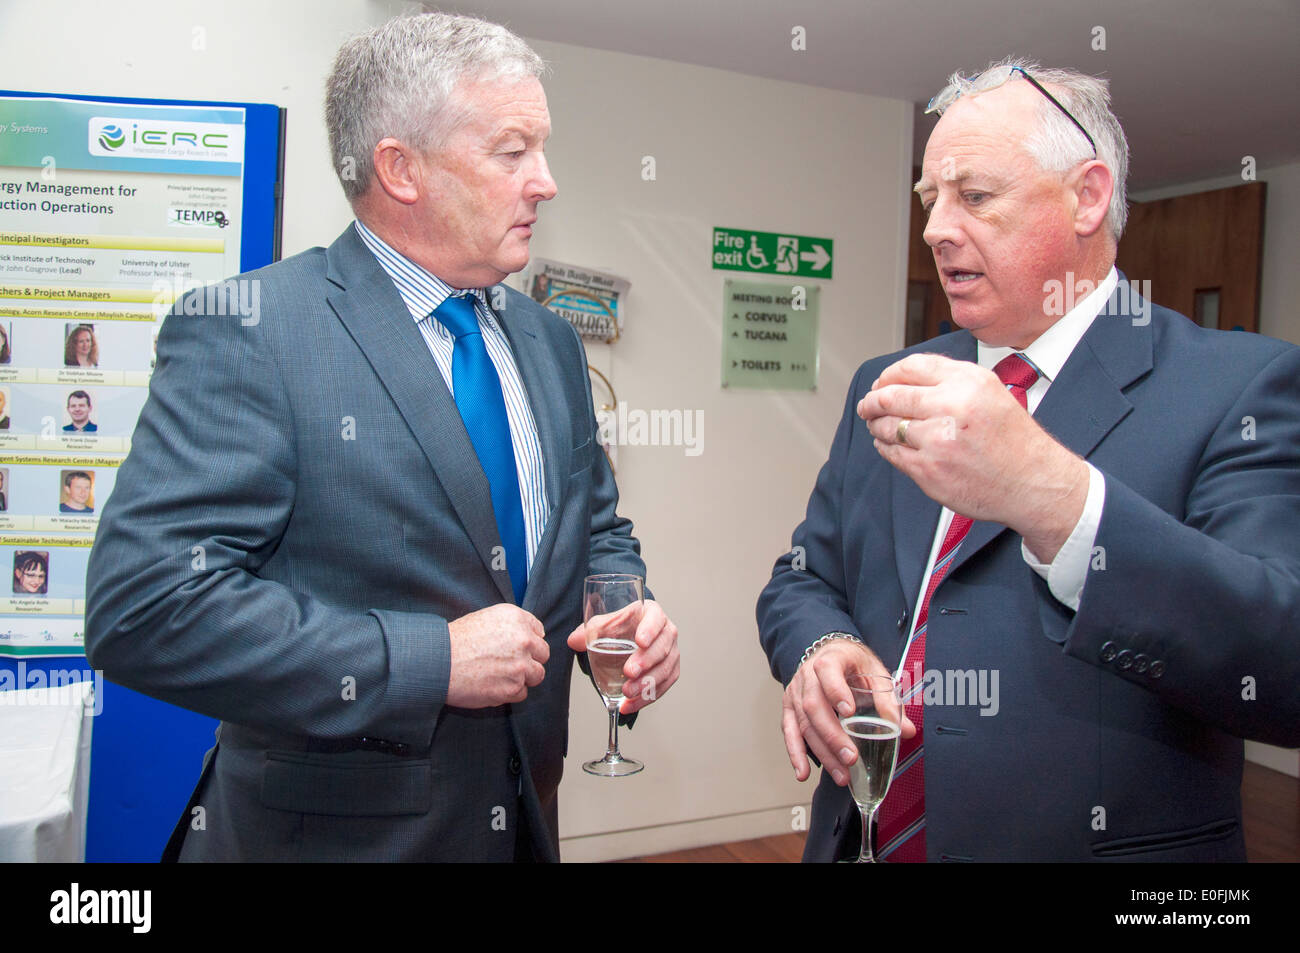 Two men talking networking at a business conference social event Stock Photo